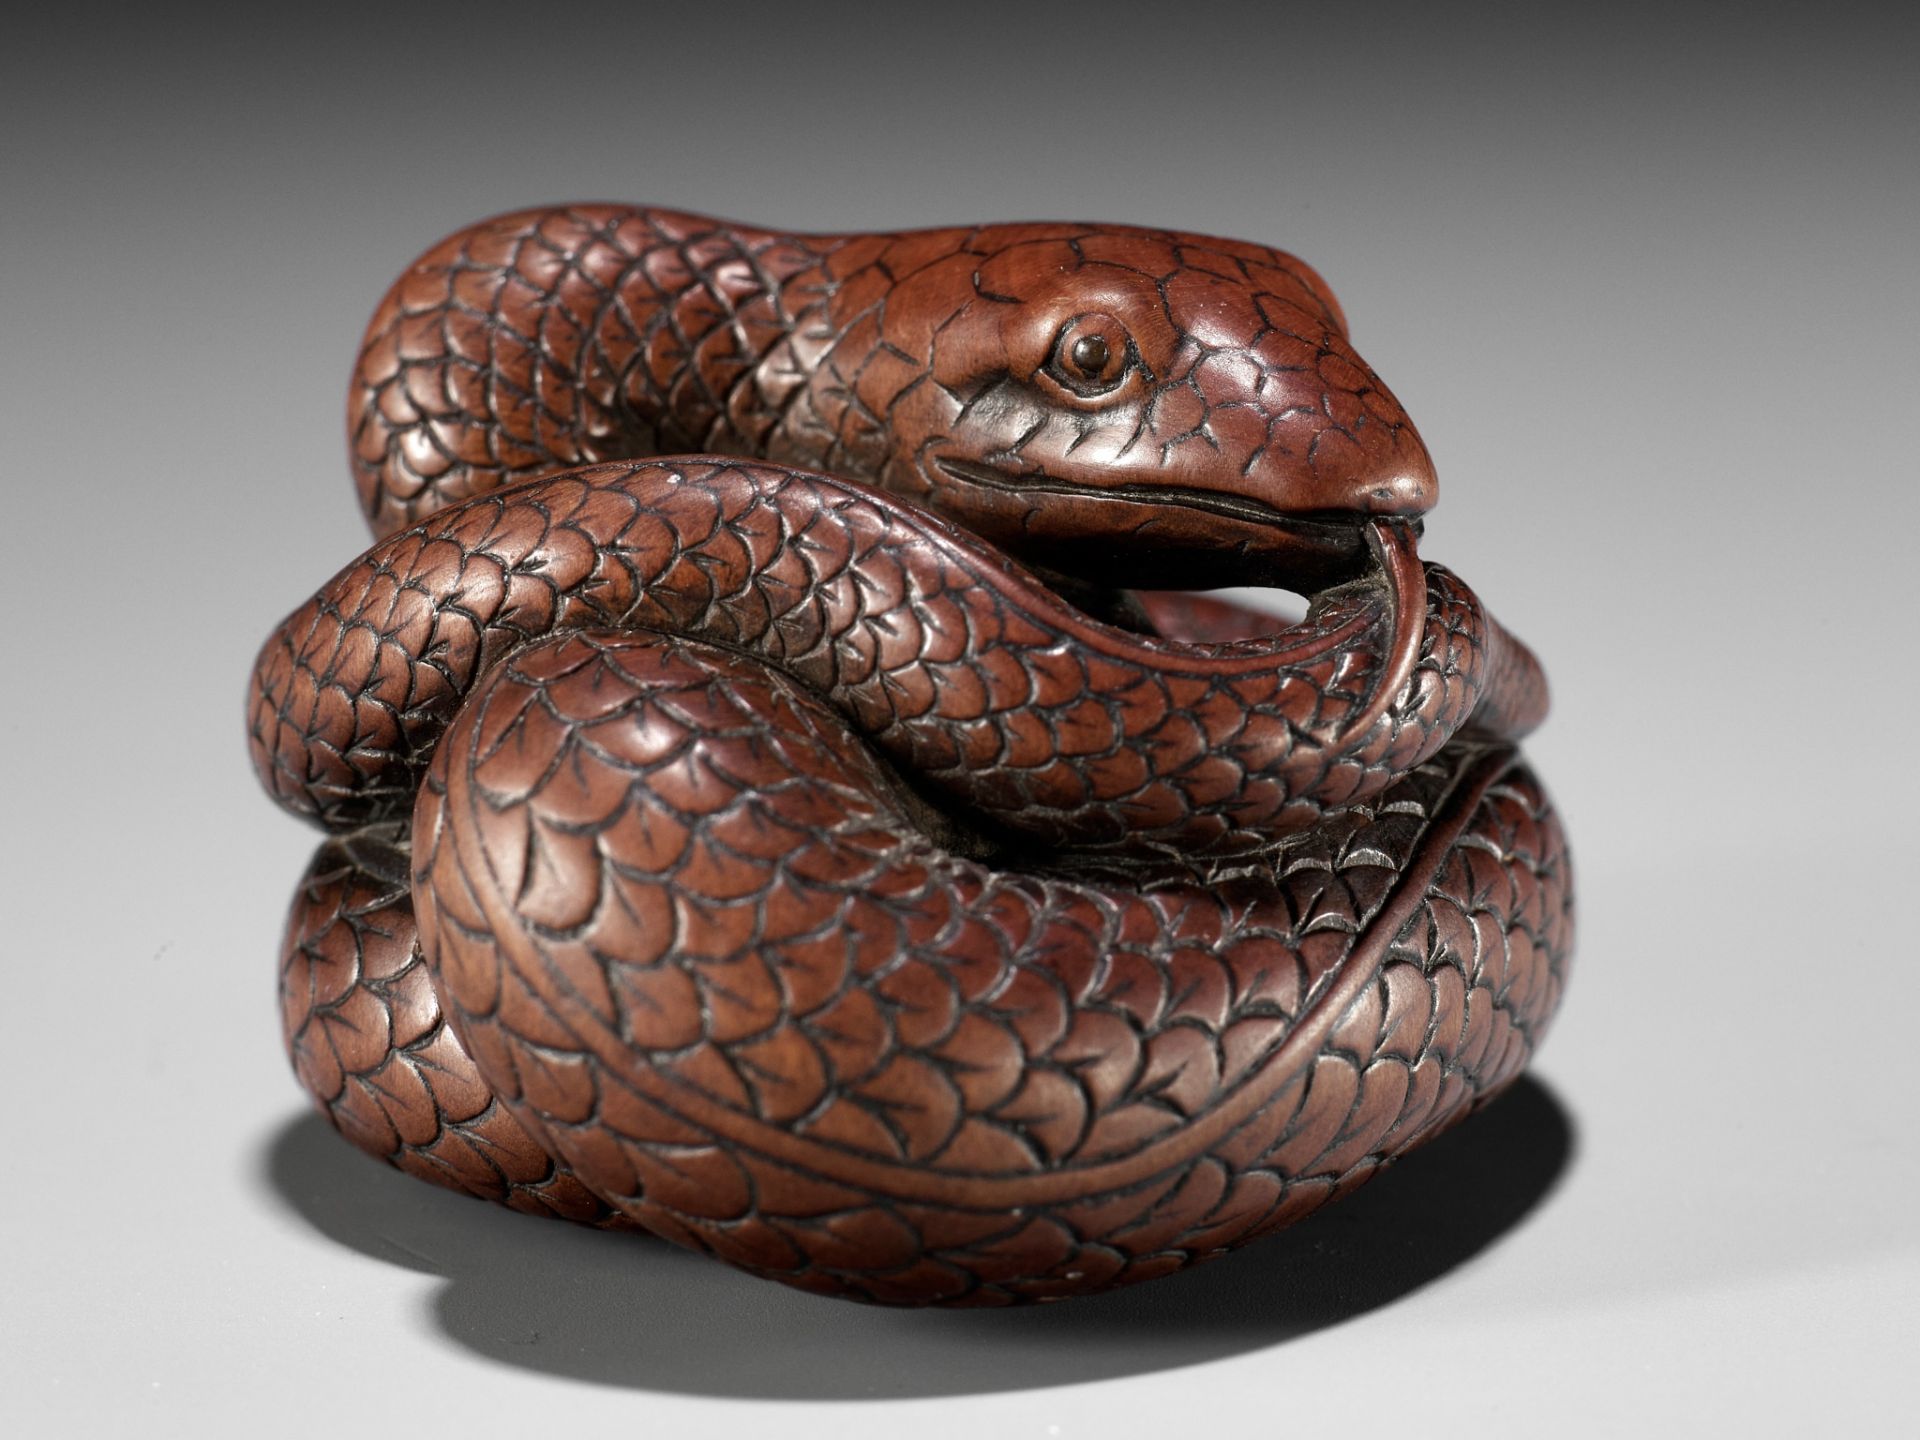 AN EXCEPTIONAL AND LARGE WOOD NETSUKE OF A SNAKE, ATTRIBUTED TO OKATOMO - Image 19 of 19